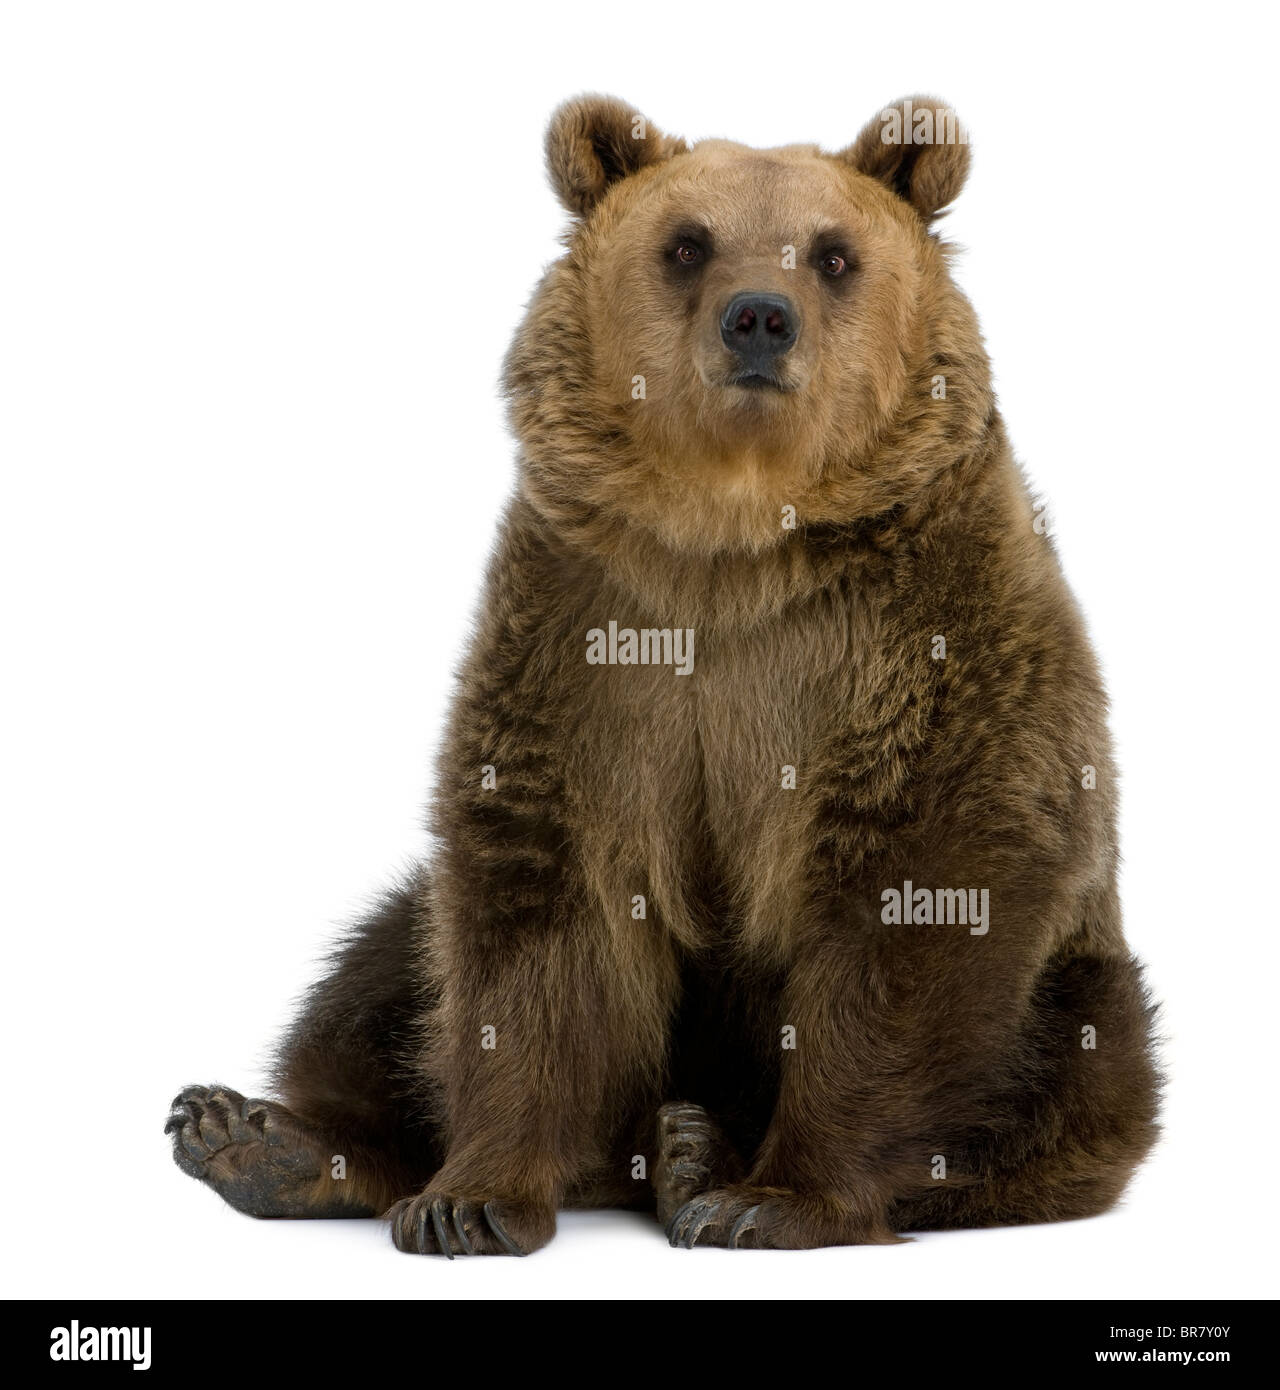 Brown Bear, 8 years old, sitting in front of white background Stock Photo